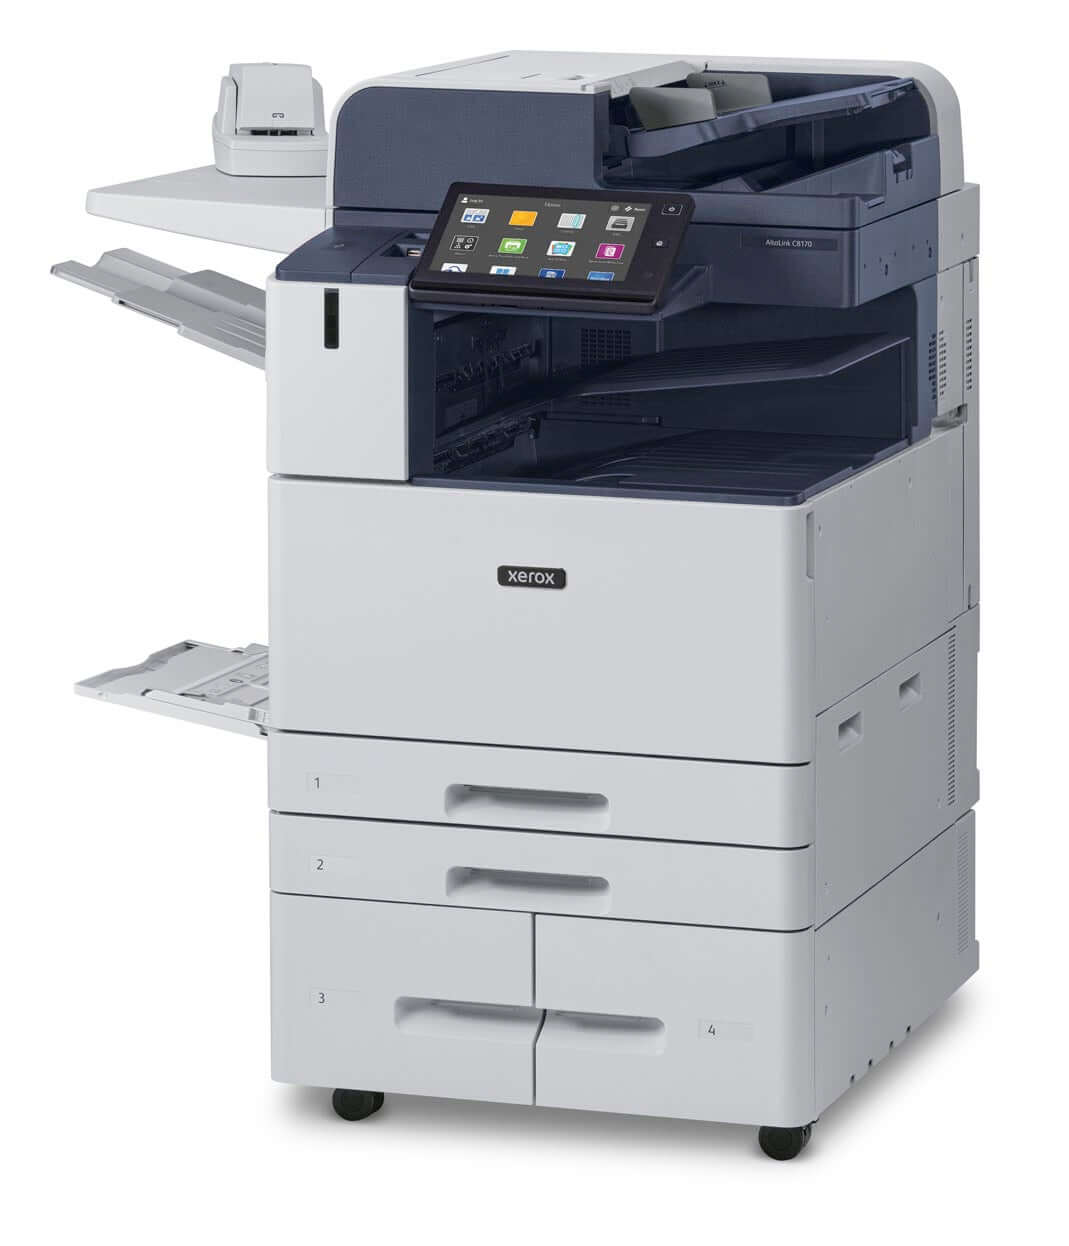 Xerox AltaLink C8155 A3 Colour Multi-Function Printer - 3,140 Paper Supply